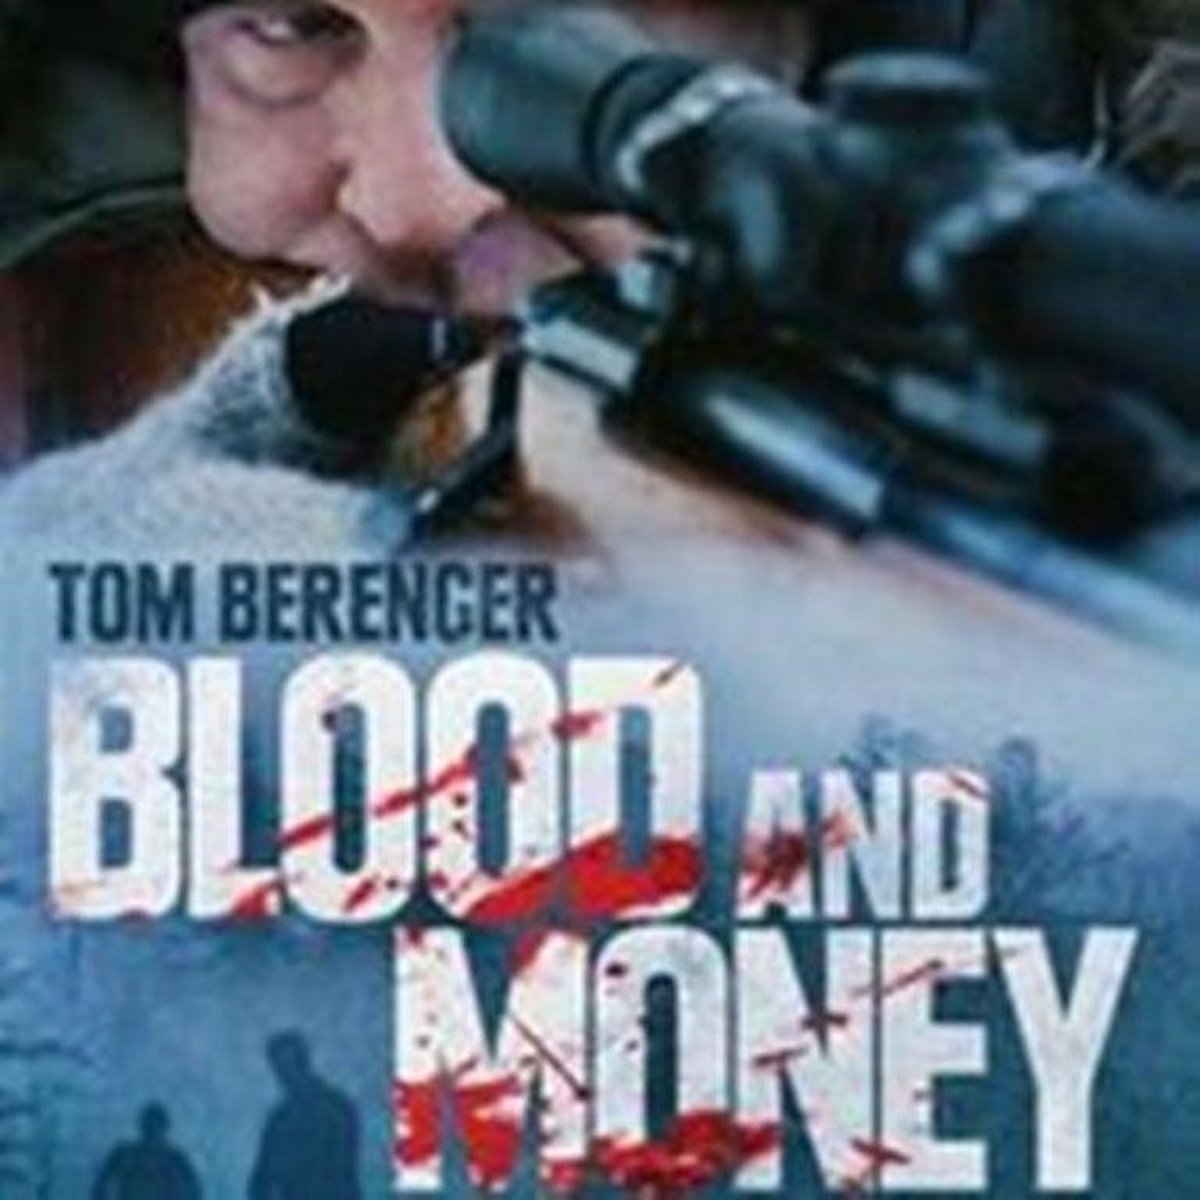 Blood And Money (DVD)